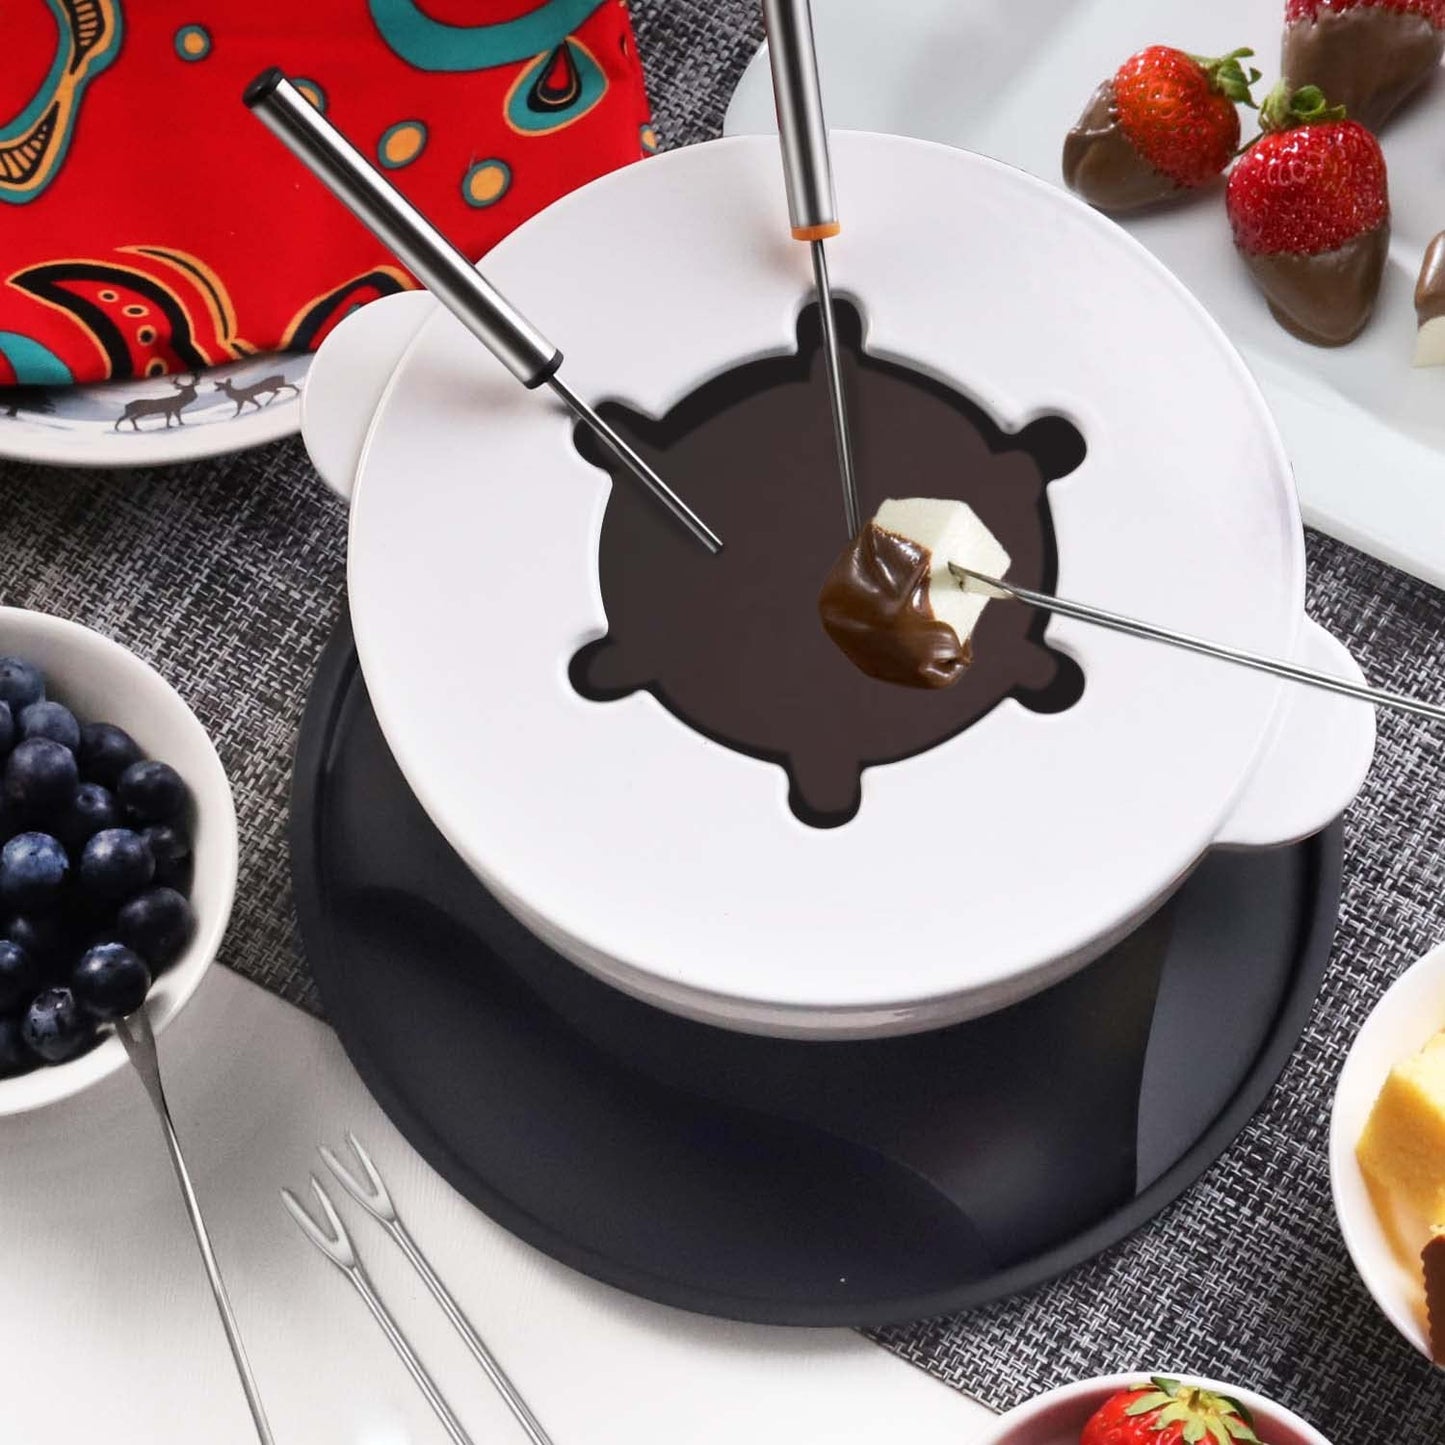 Artestia 11-Piece Cast Iron Fondue Set with Adjustable Burner 6 Colored Forks, 5-Cup White Cheese Fondue Pot for Chocolate, Meat, 4-6 Person